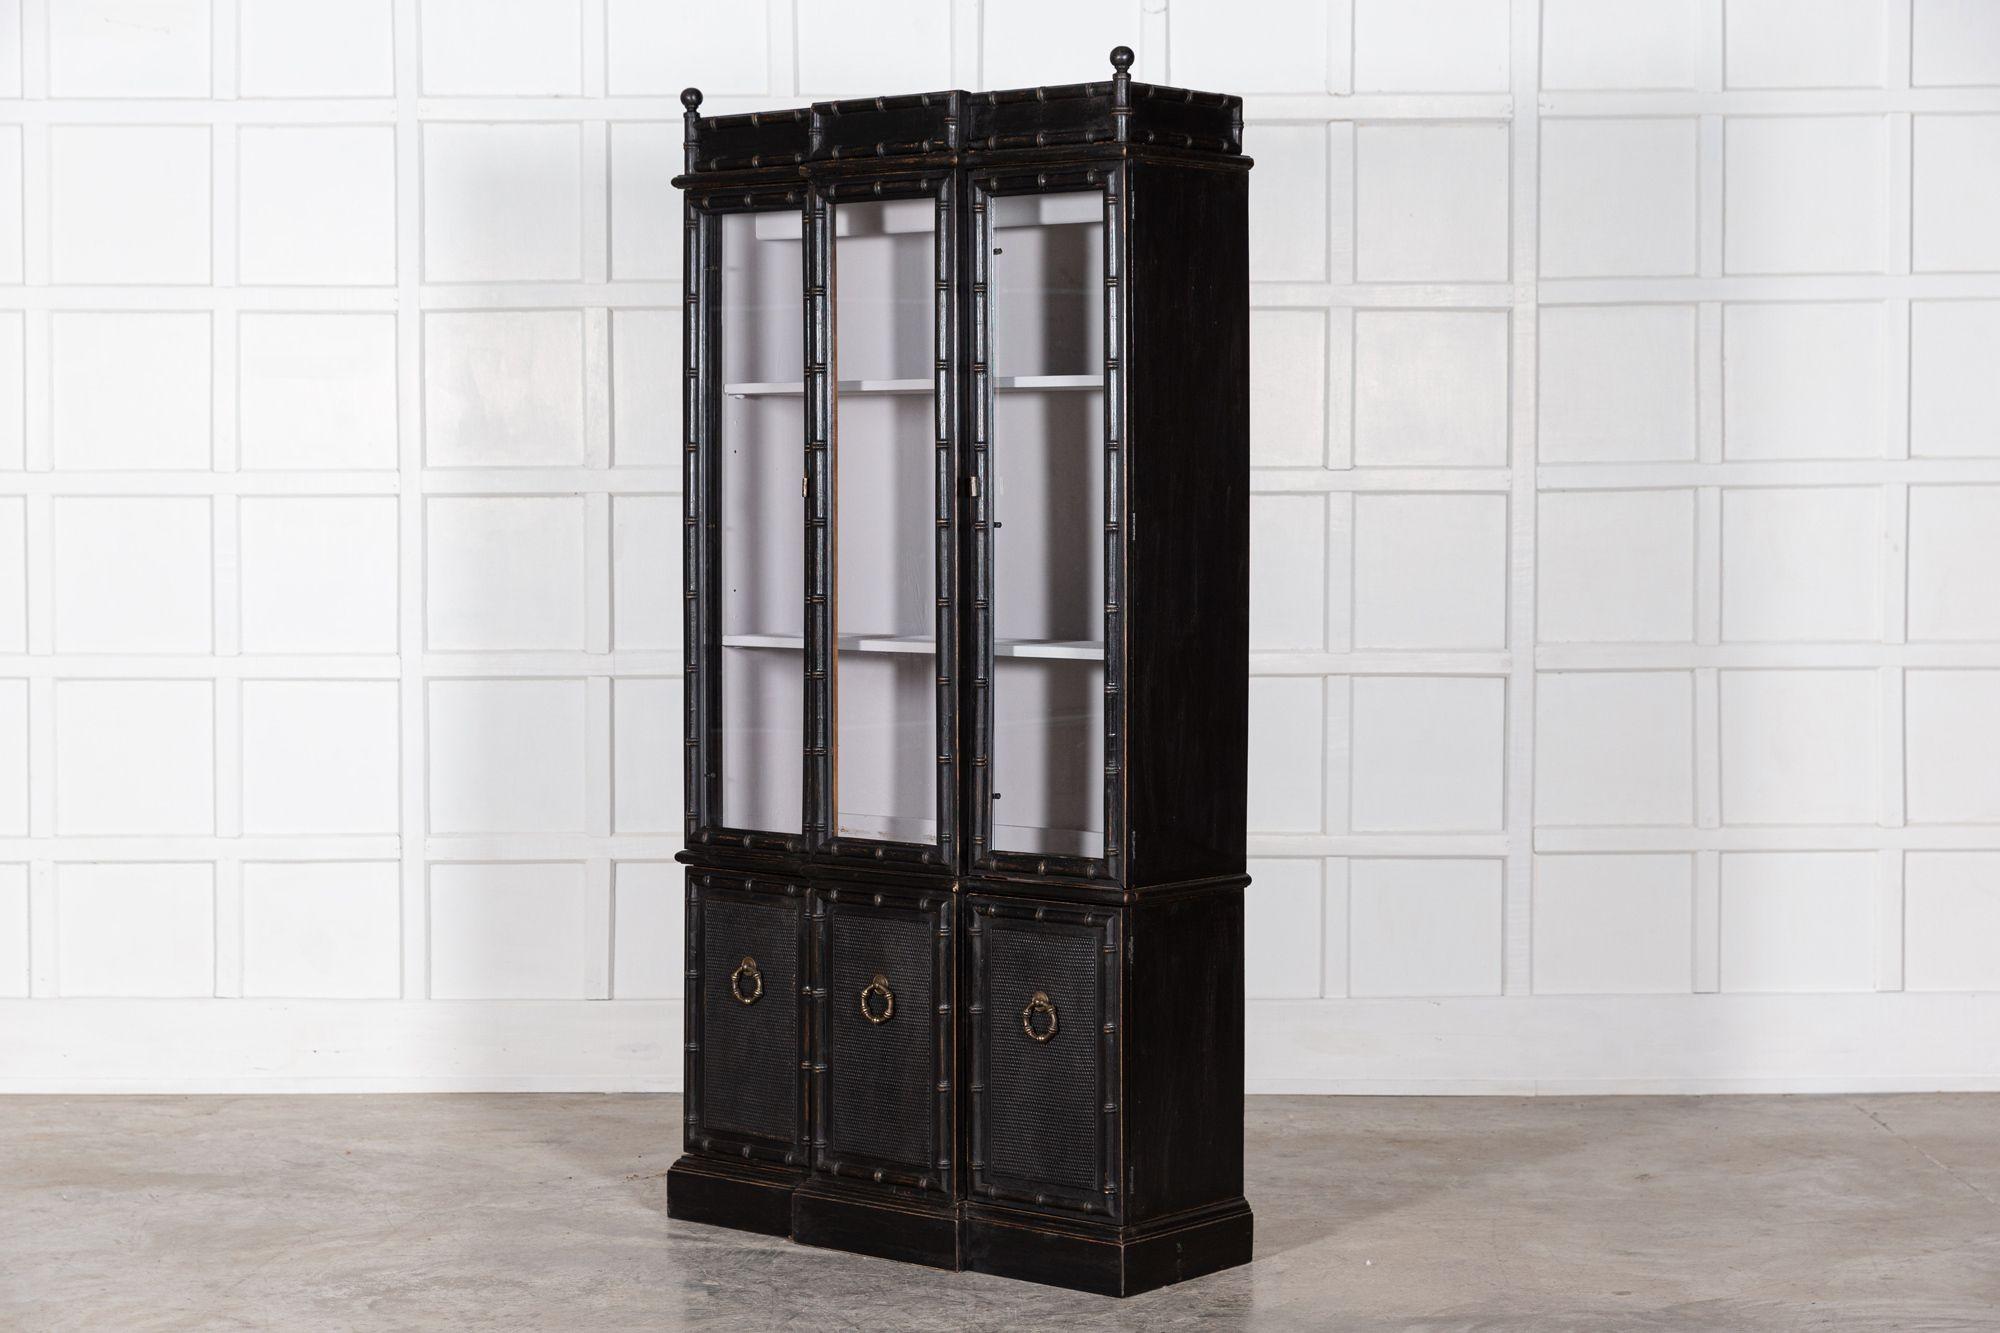 French Ebonised Faux Bamboo Beech Glazed Breakfront Bookcase / Vitrine In Good Condition For Sale In Staffordshire, GB